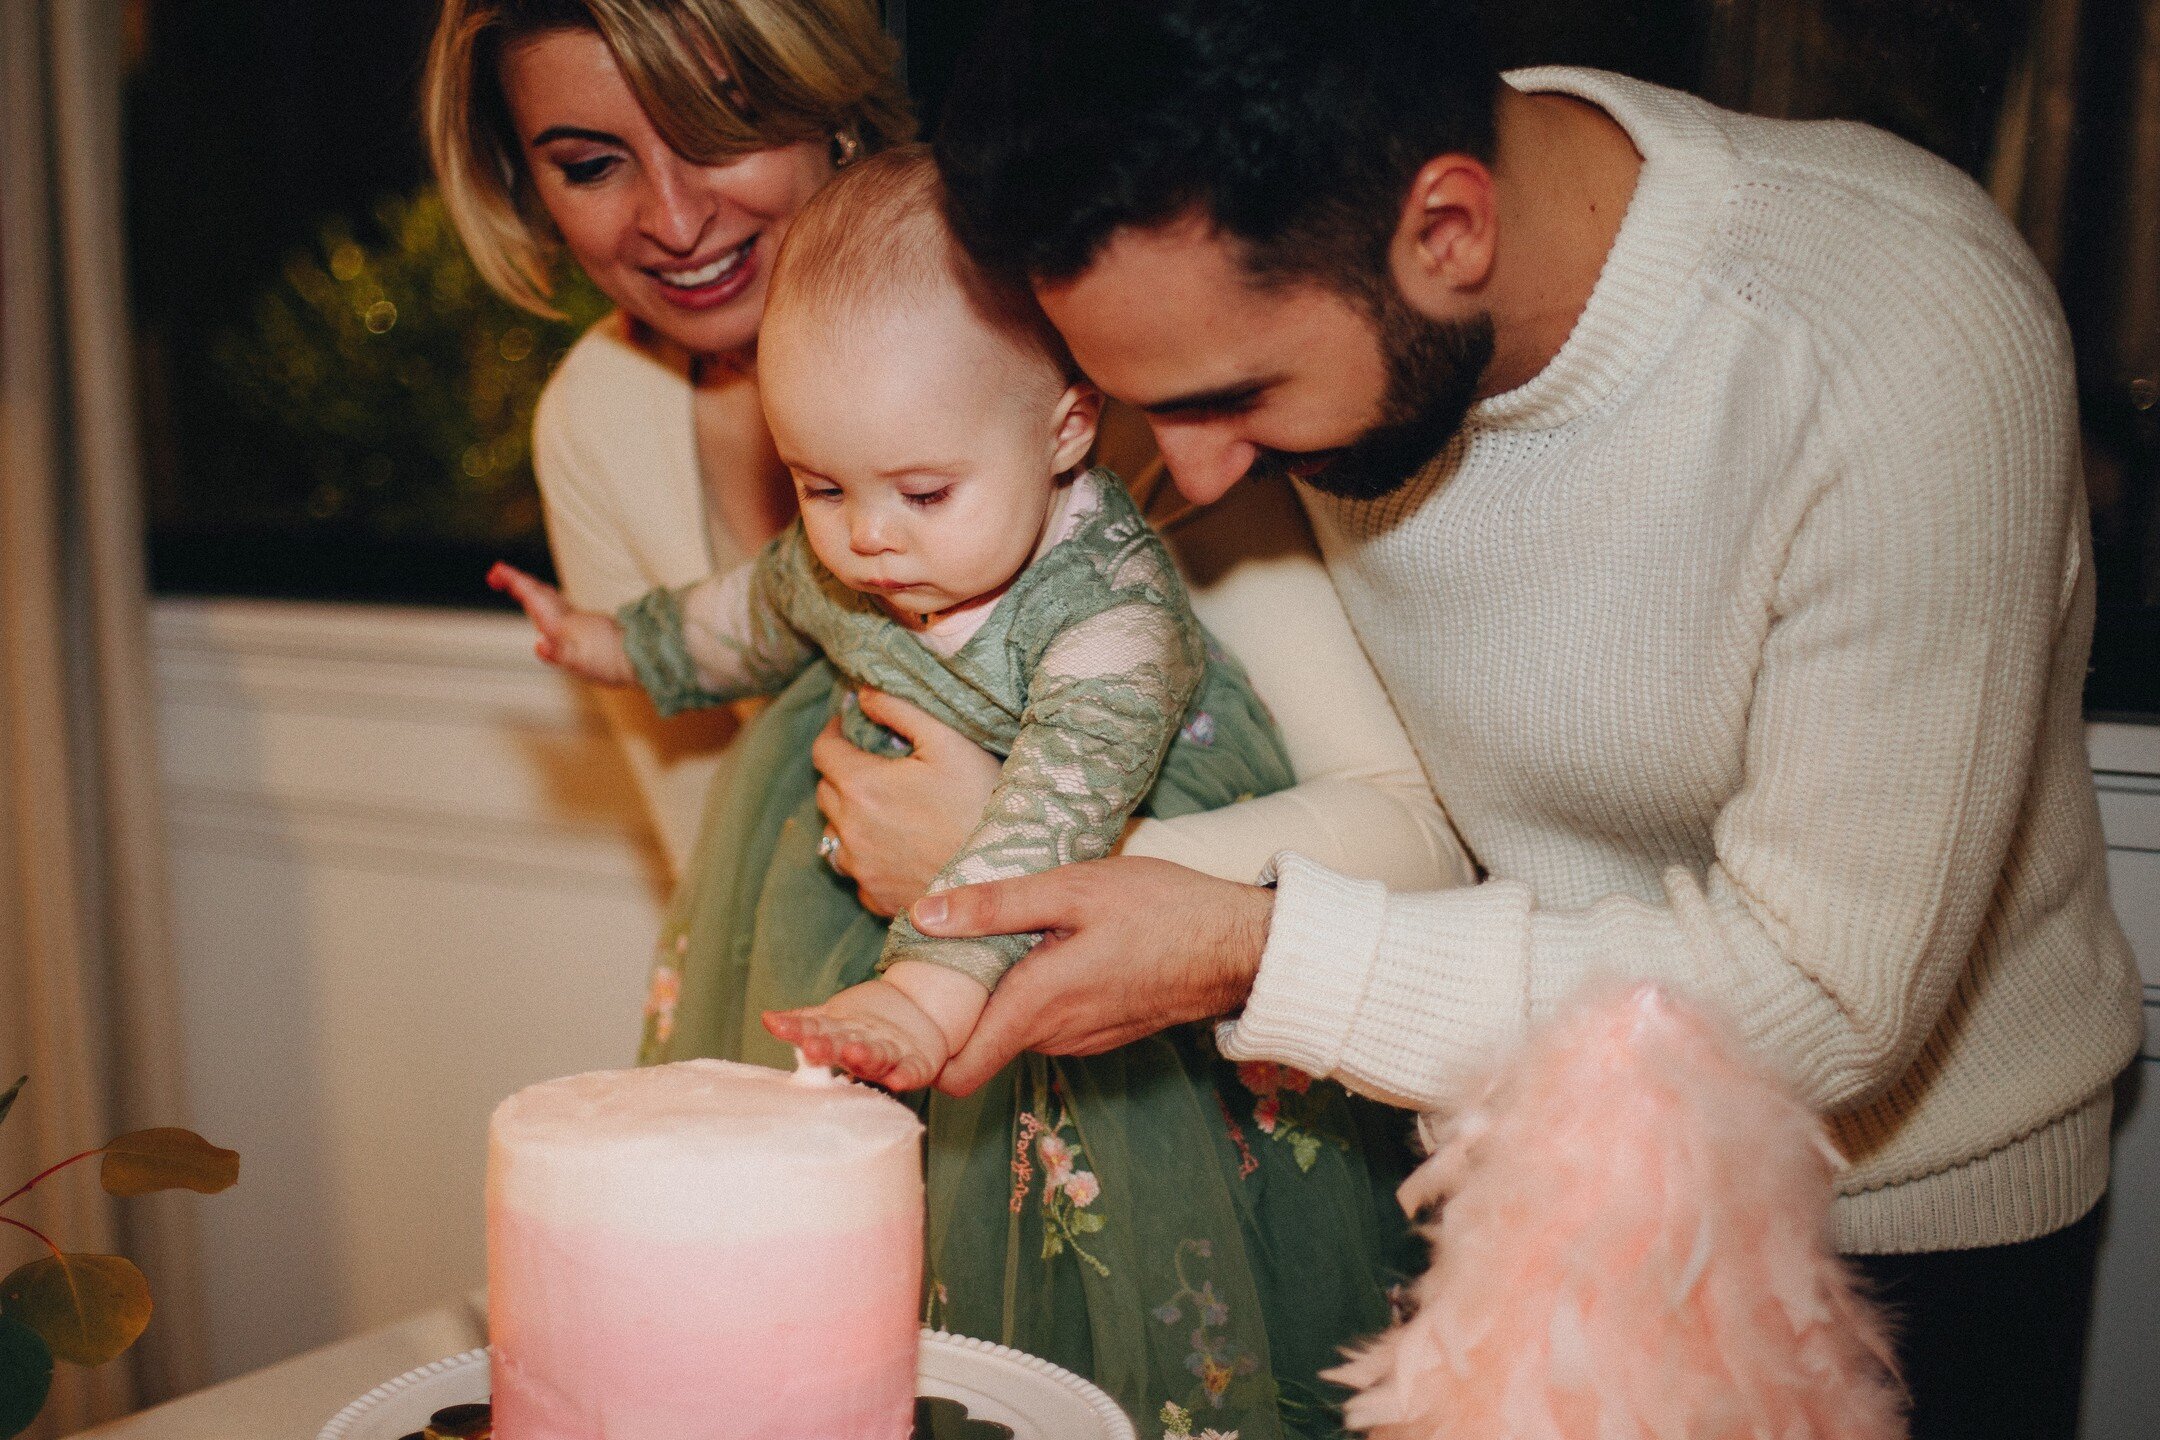 when even the baby's like &quot;nah this cake is too pretty to smash...&quot;

consider hiring me to photograph or video your next party, wedding, concert, rave (do people still rave?), BBQ, etc. want creative portraits done? I gotchu. need BTS for y